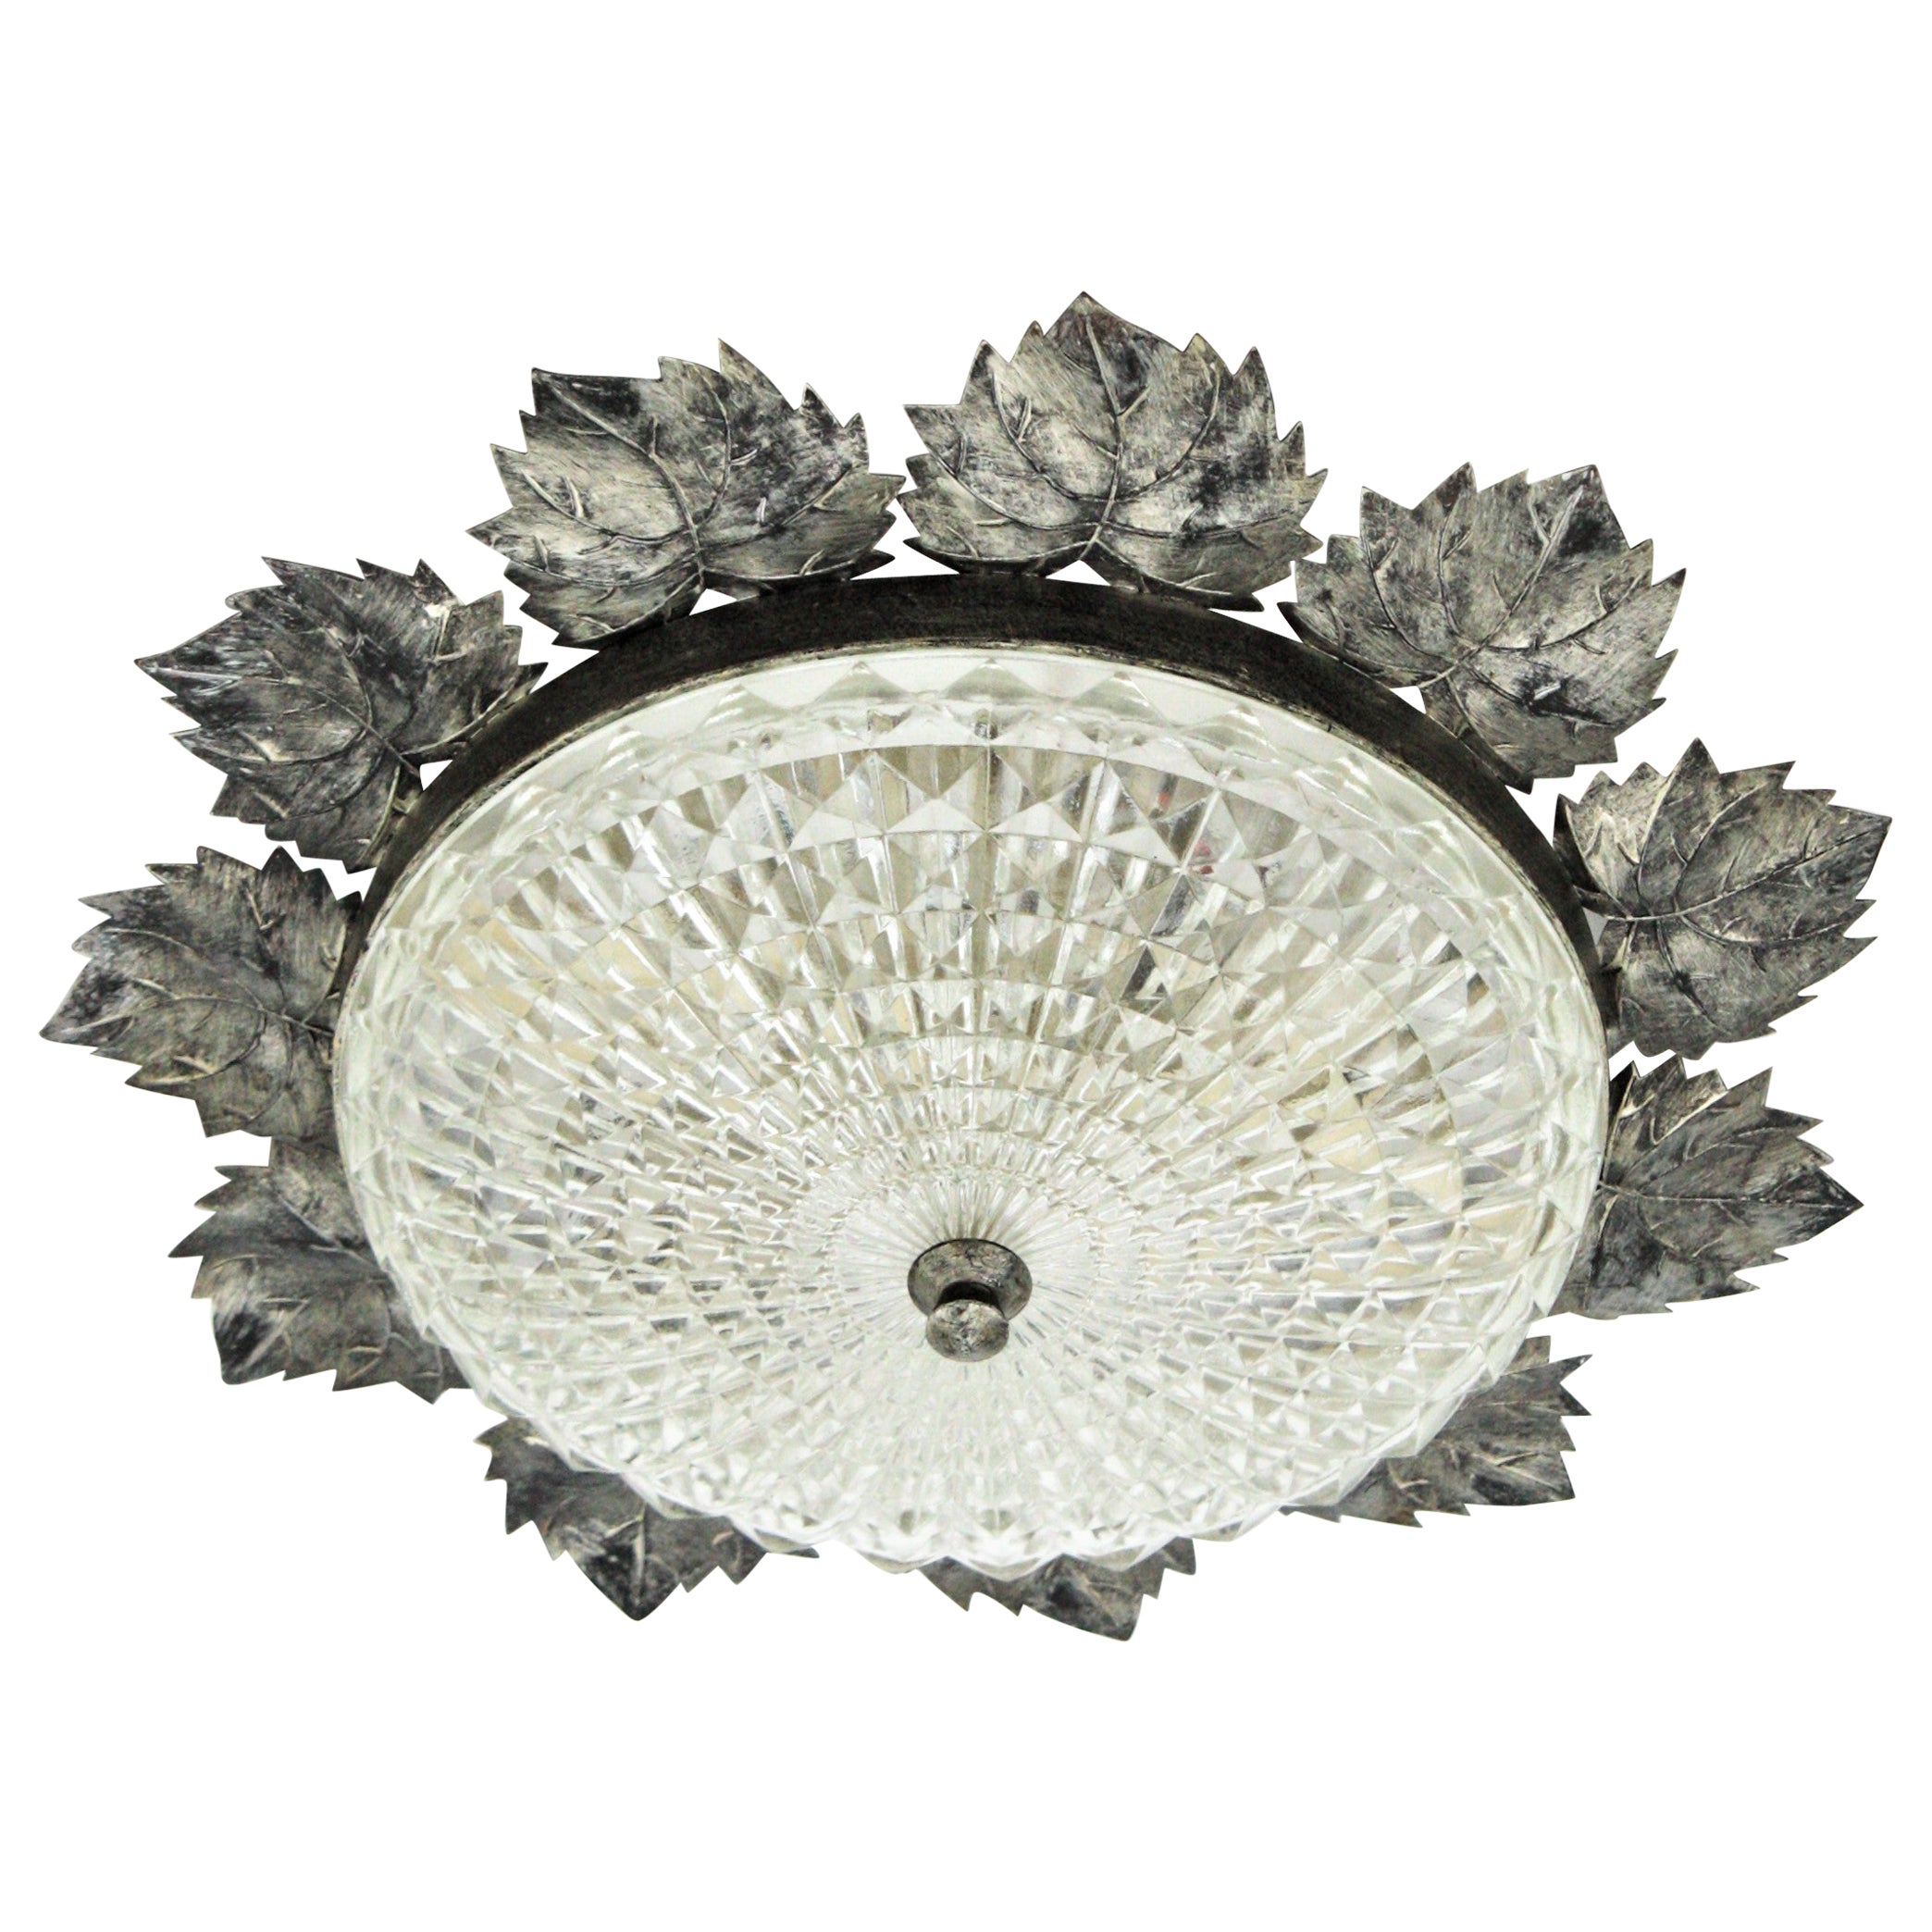 Mid-Century Modern Sunburst Silver Patinated Iron and Glass Flush Mount Light, Leaves Design For Sale